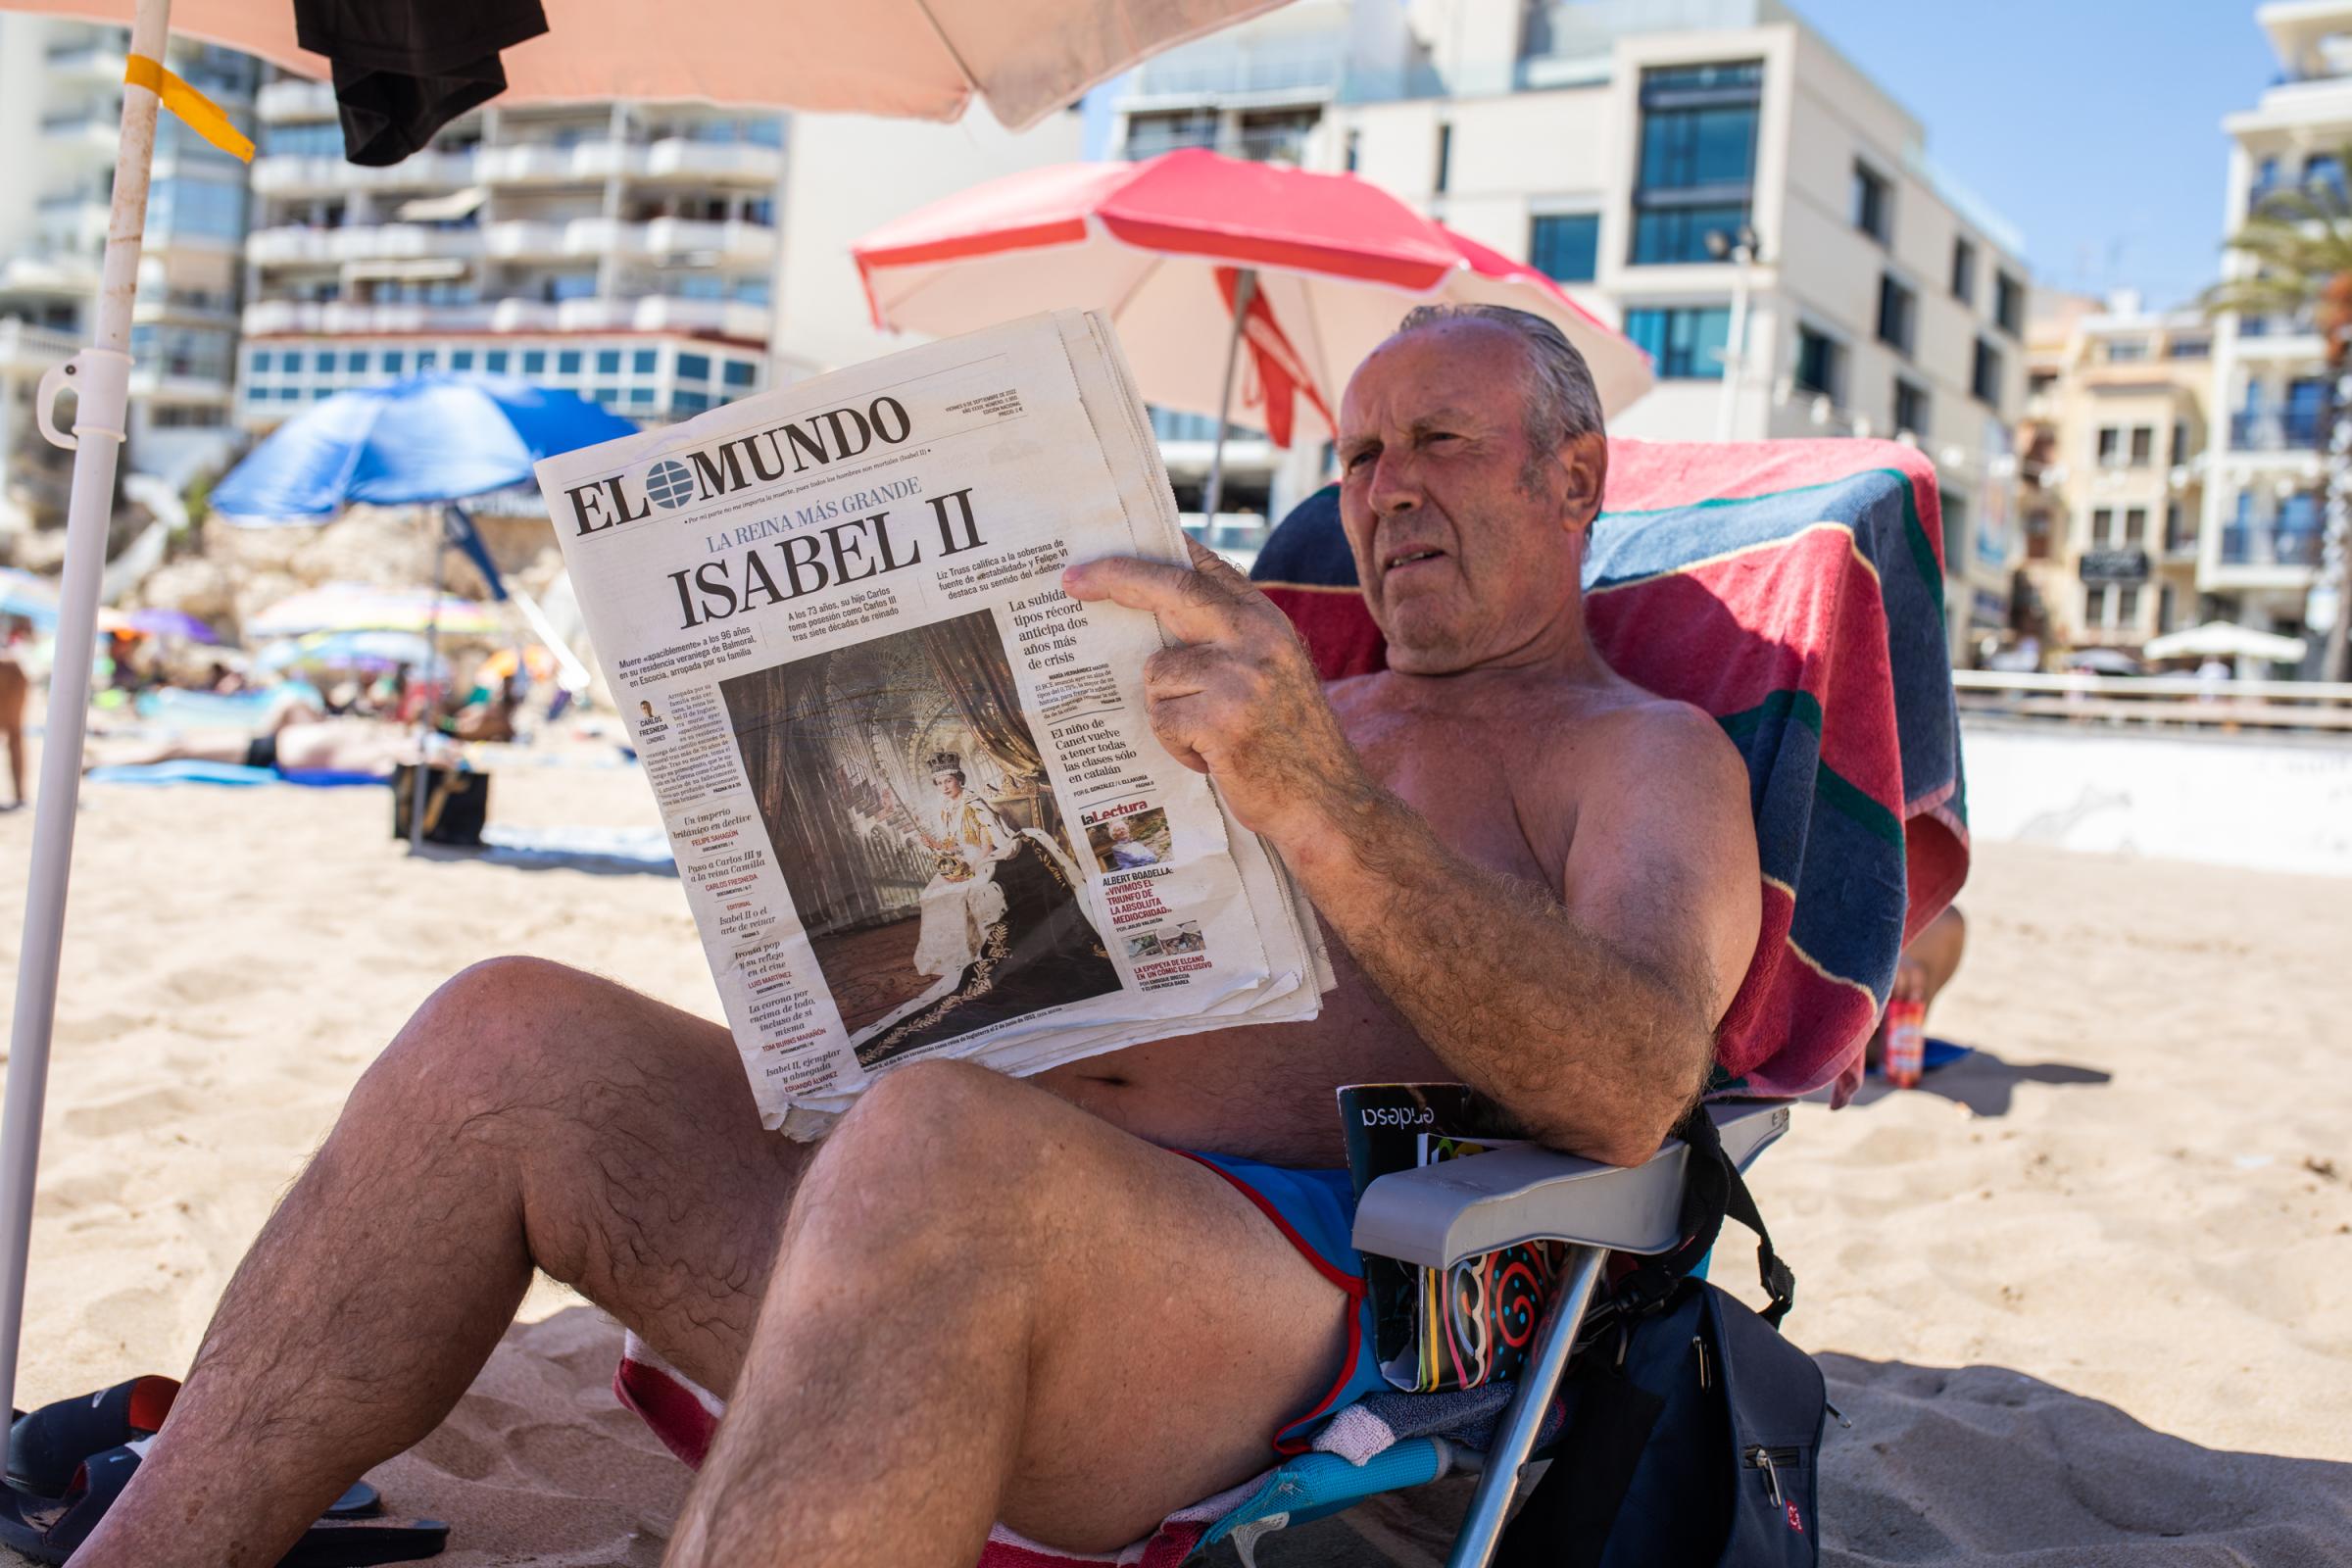 British Tourists In Benidorm Pay Tribute To Queen Elizabeth II - BENIDORM, SPAIN - SEPTEMBER 10: A tourist reads a Spanish...